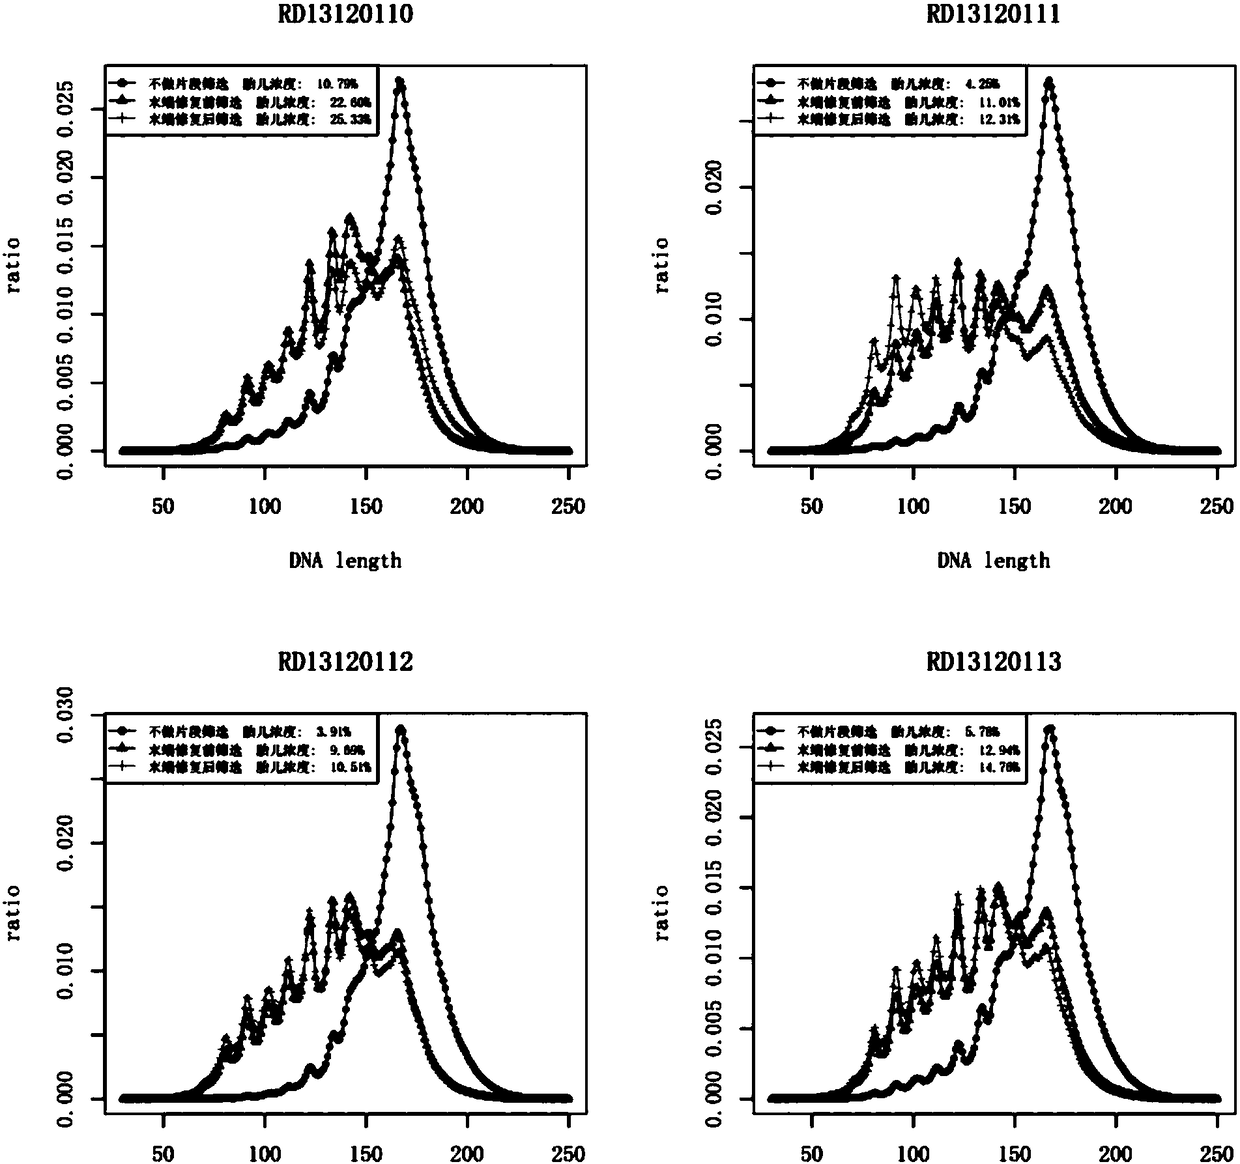 Kit, device and method for increasing fetal free dna concentration in maternal peripheral blood